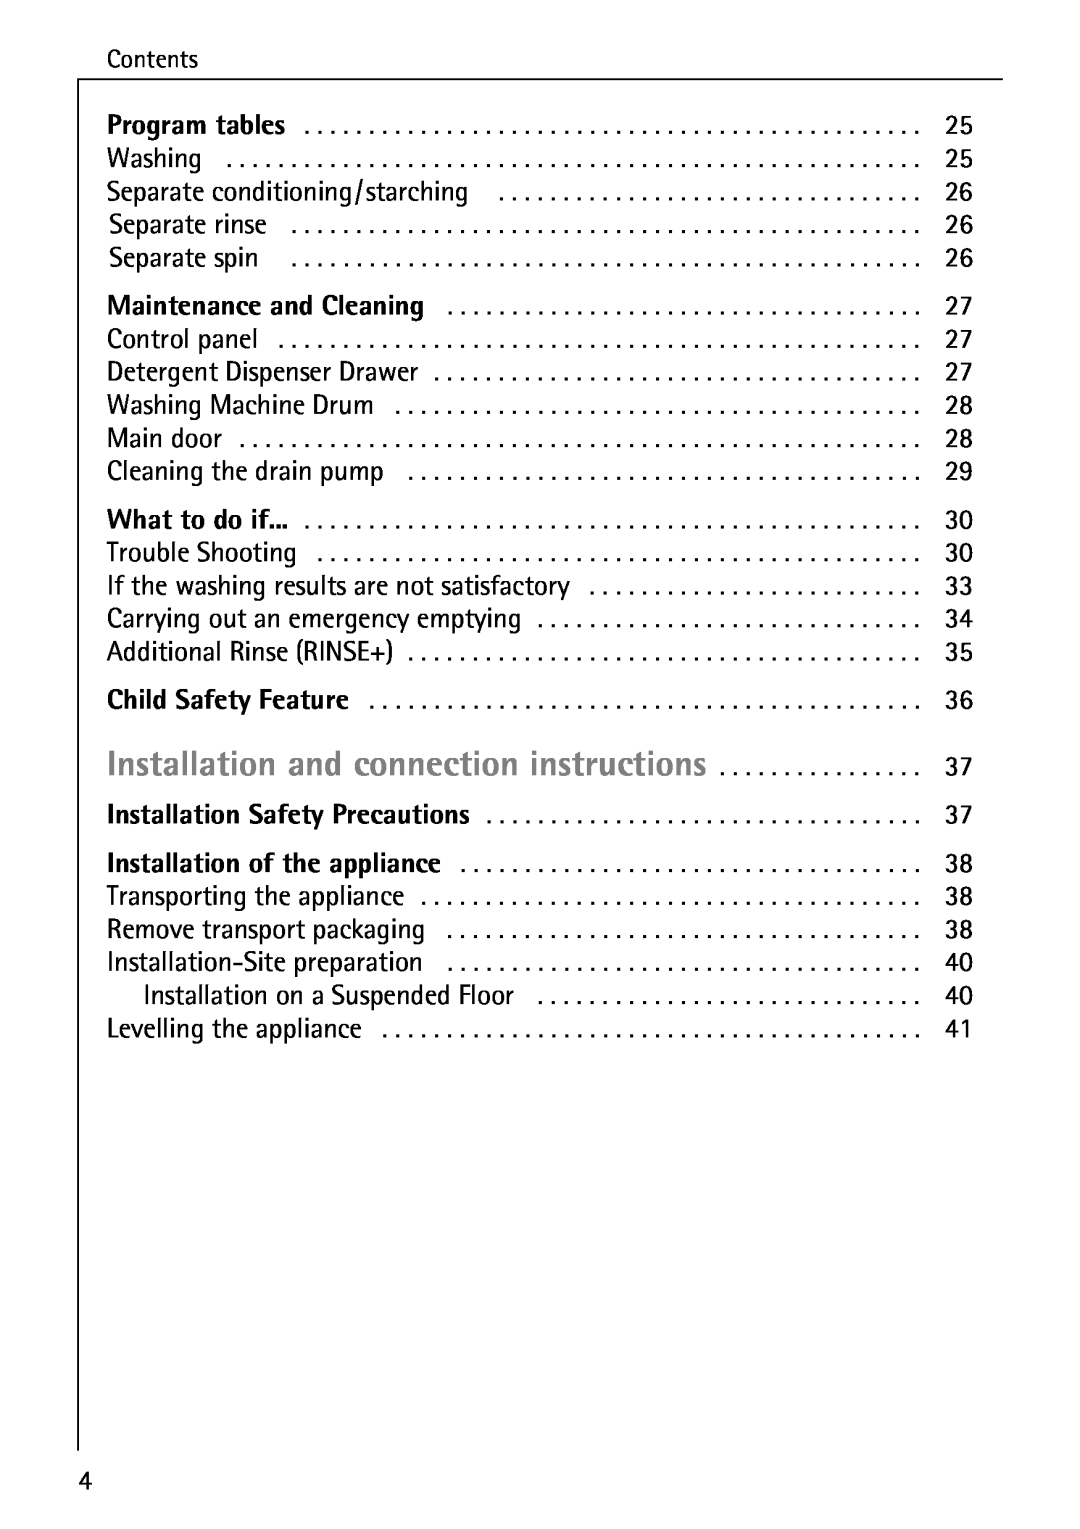 Electrolux 76639 manual Installation and connection instructions, Contents, Installation Safety Precautions 